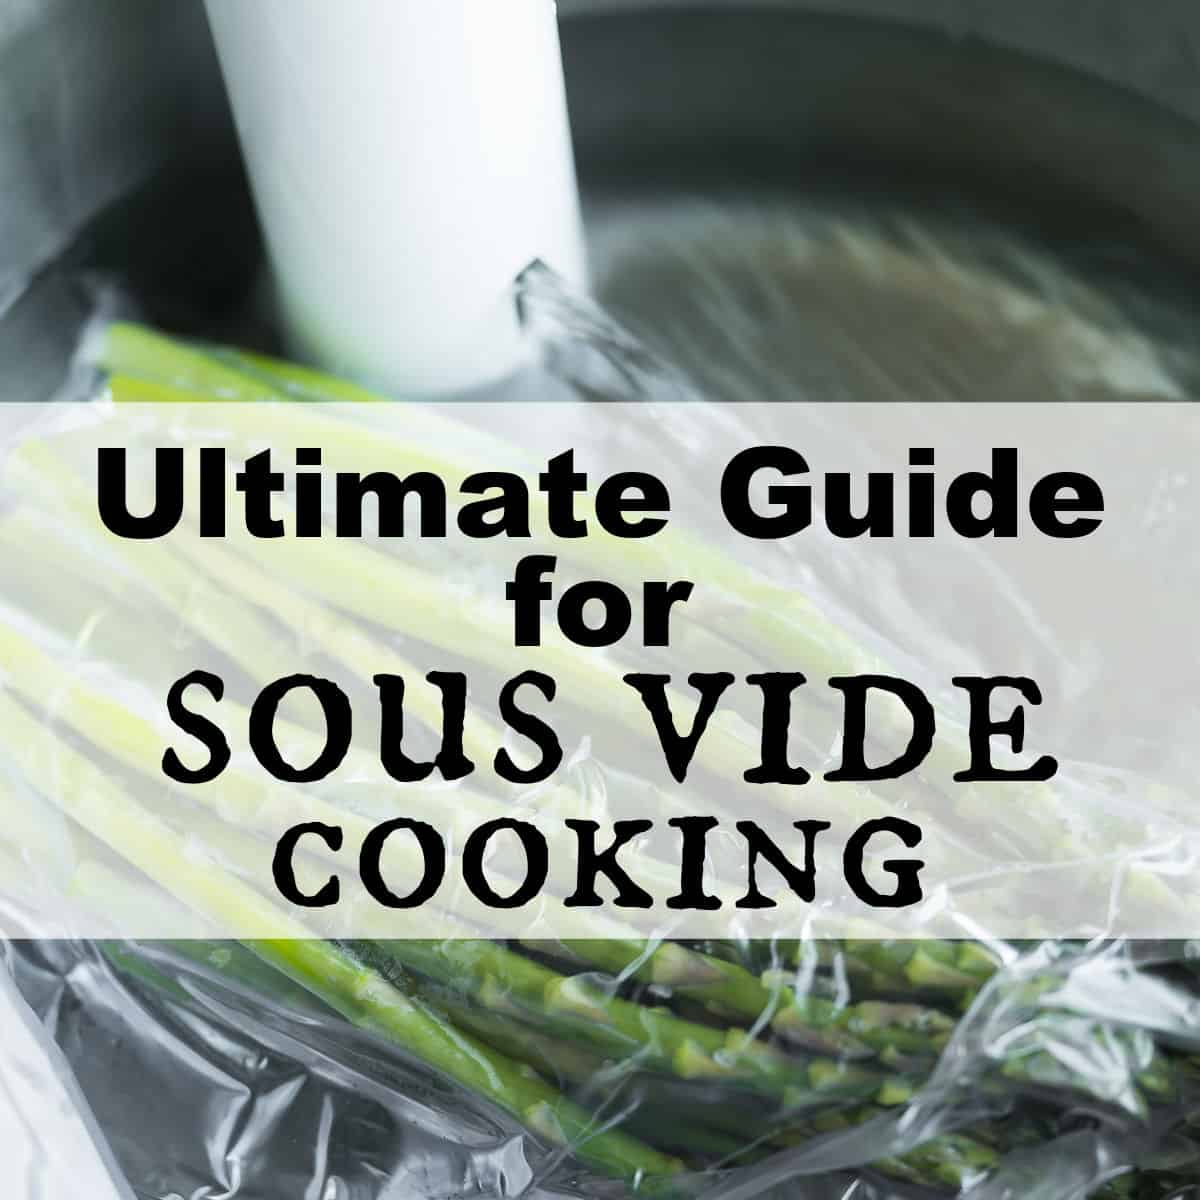 An introductory guide to sous vide cooking